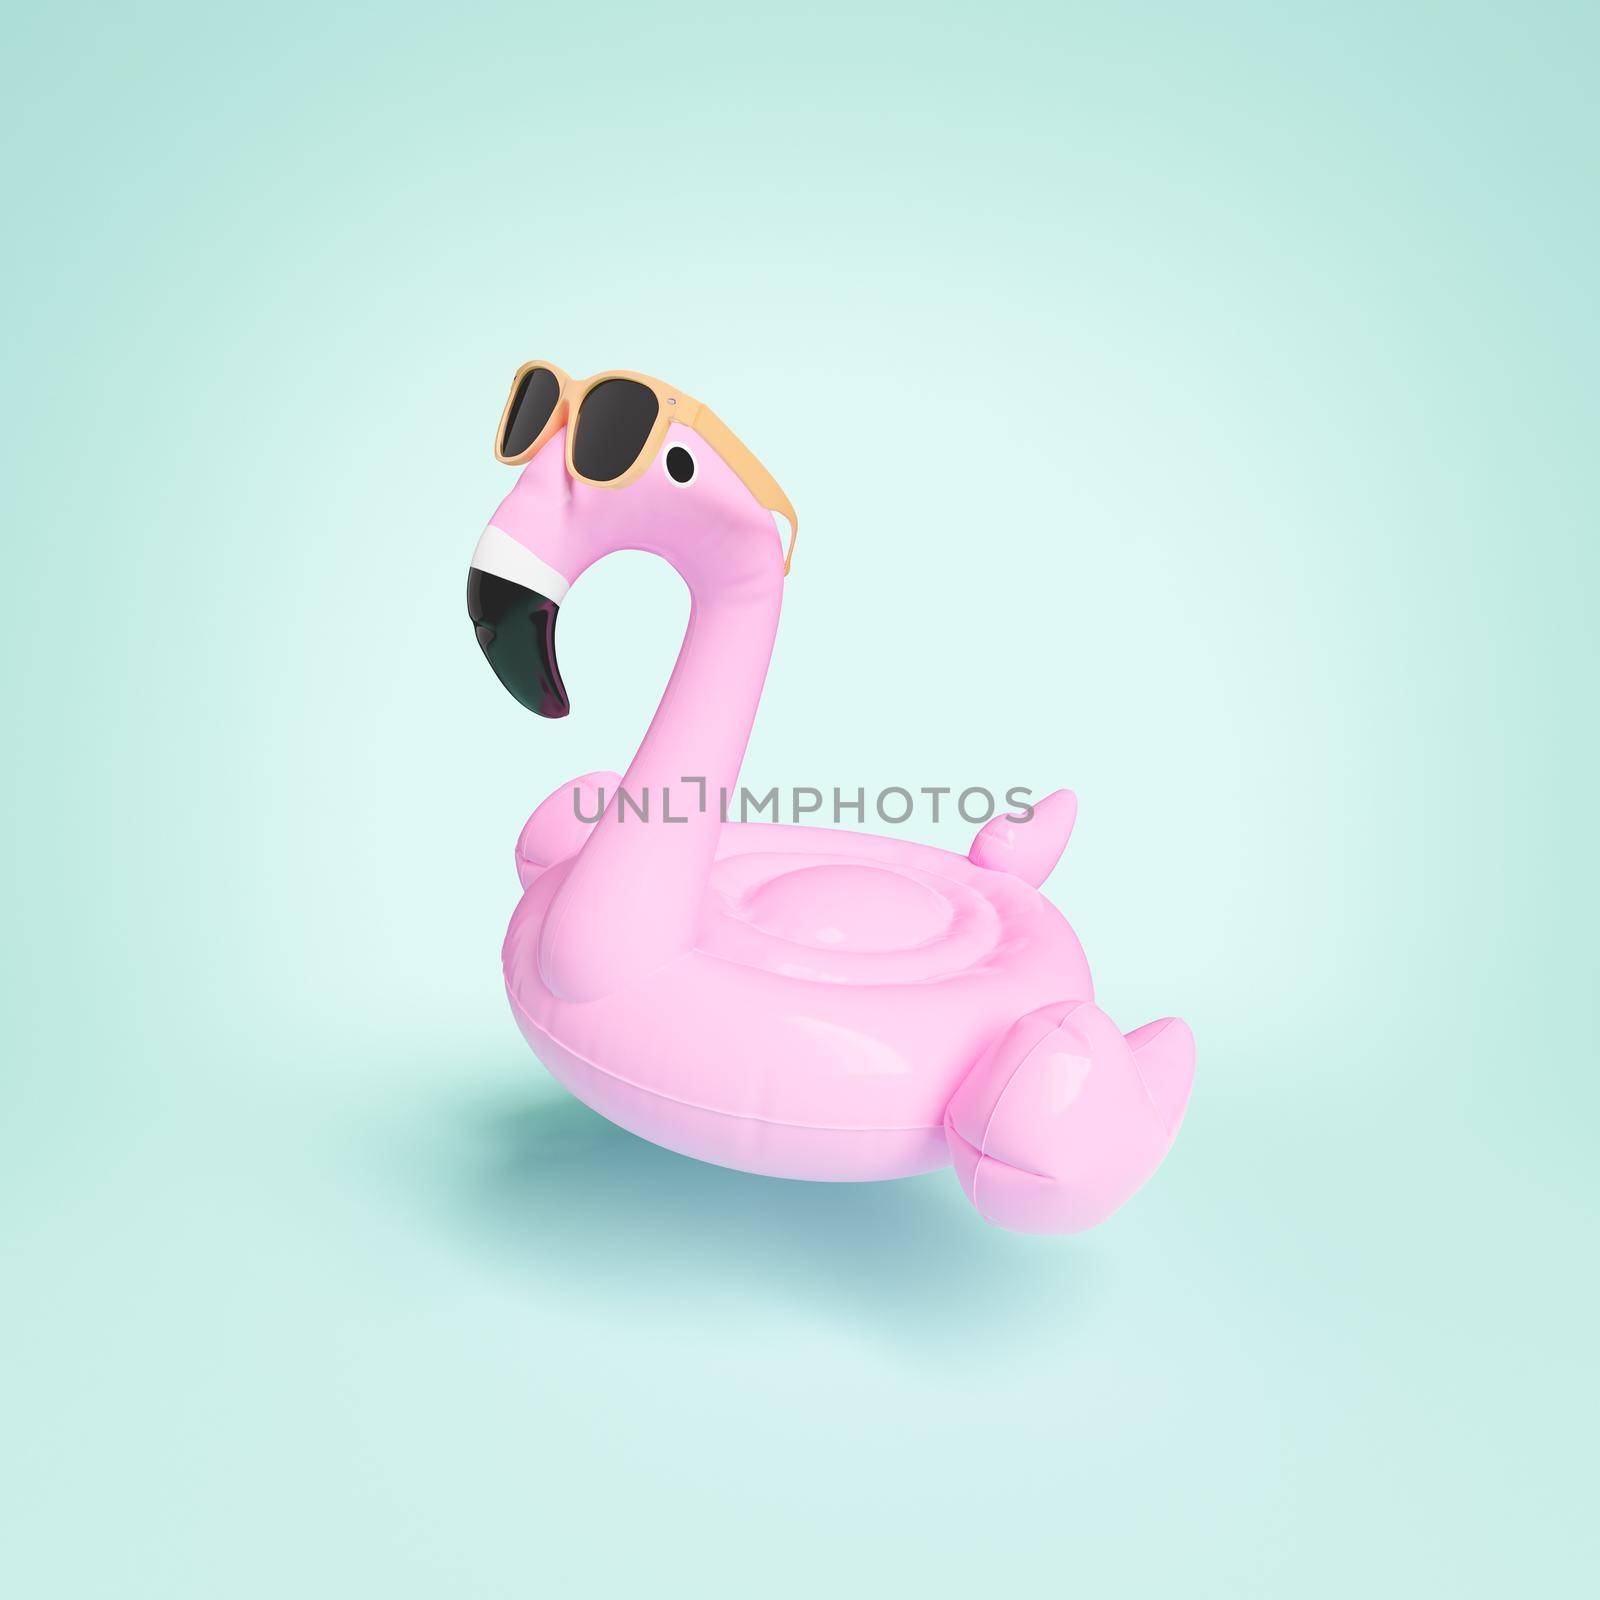 3D illustration of pink flamingo float with orange sunglasses during summer vacation against mint background